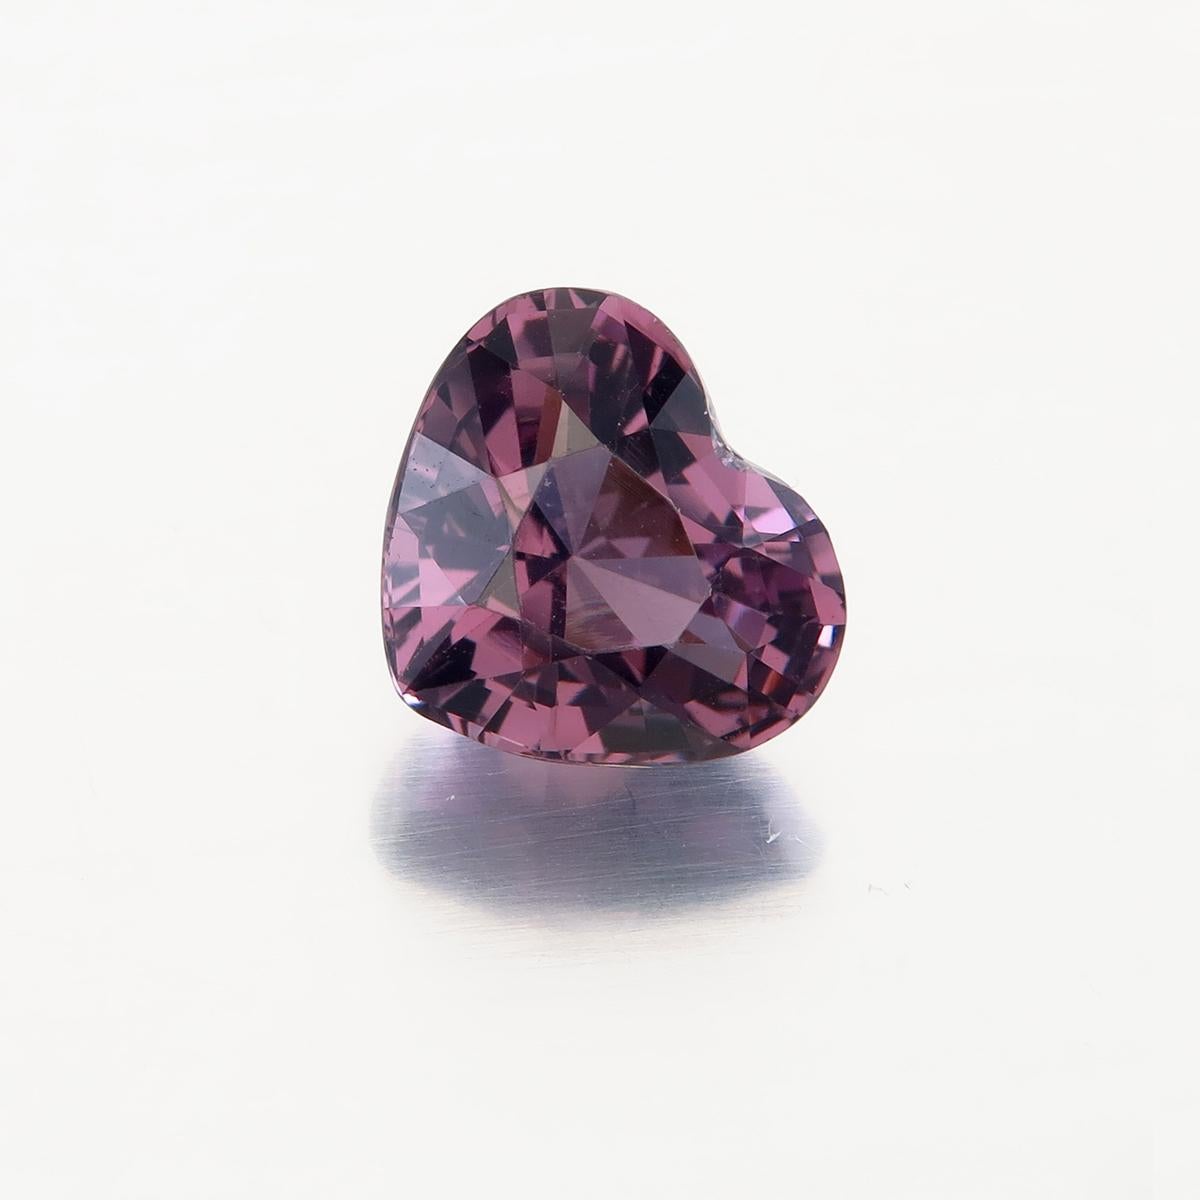 1.50 Carat Pinkish Purple 
Shape: Heart
Cutting Style: Faceted Brilliant Step
Dimensions: 7.70 x 6.61 x 4.39 mm
Color: Violet medium saturation with a medium-light tone
Weight: 1.50Carat
No Heat or treatment
Lotus report: 4295-8264
Sri Lanka